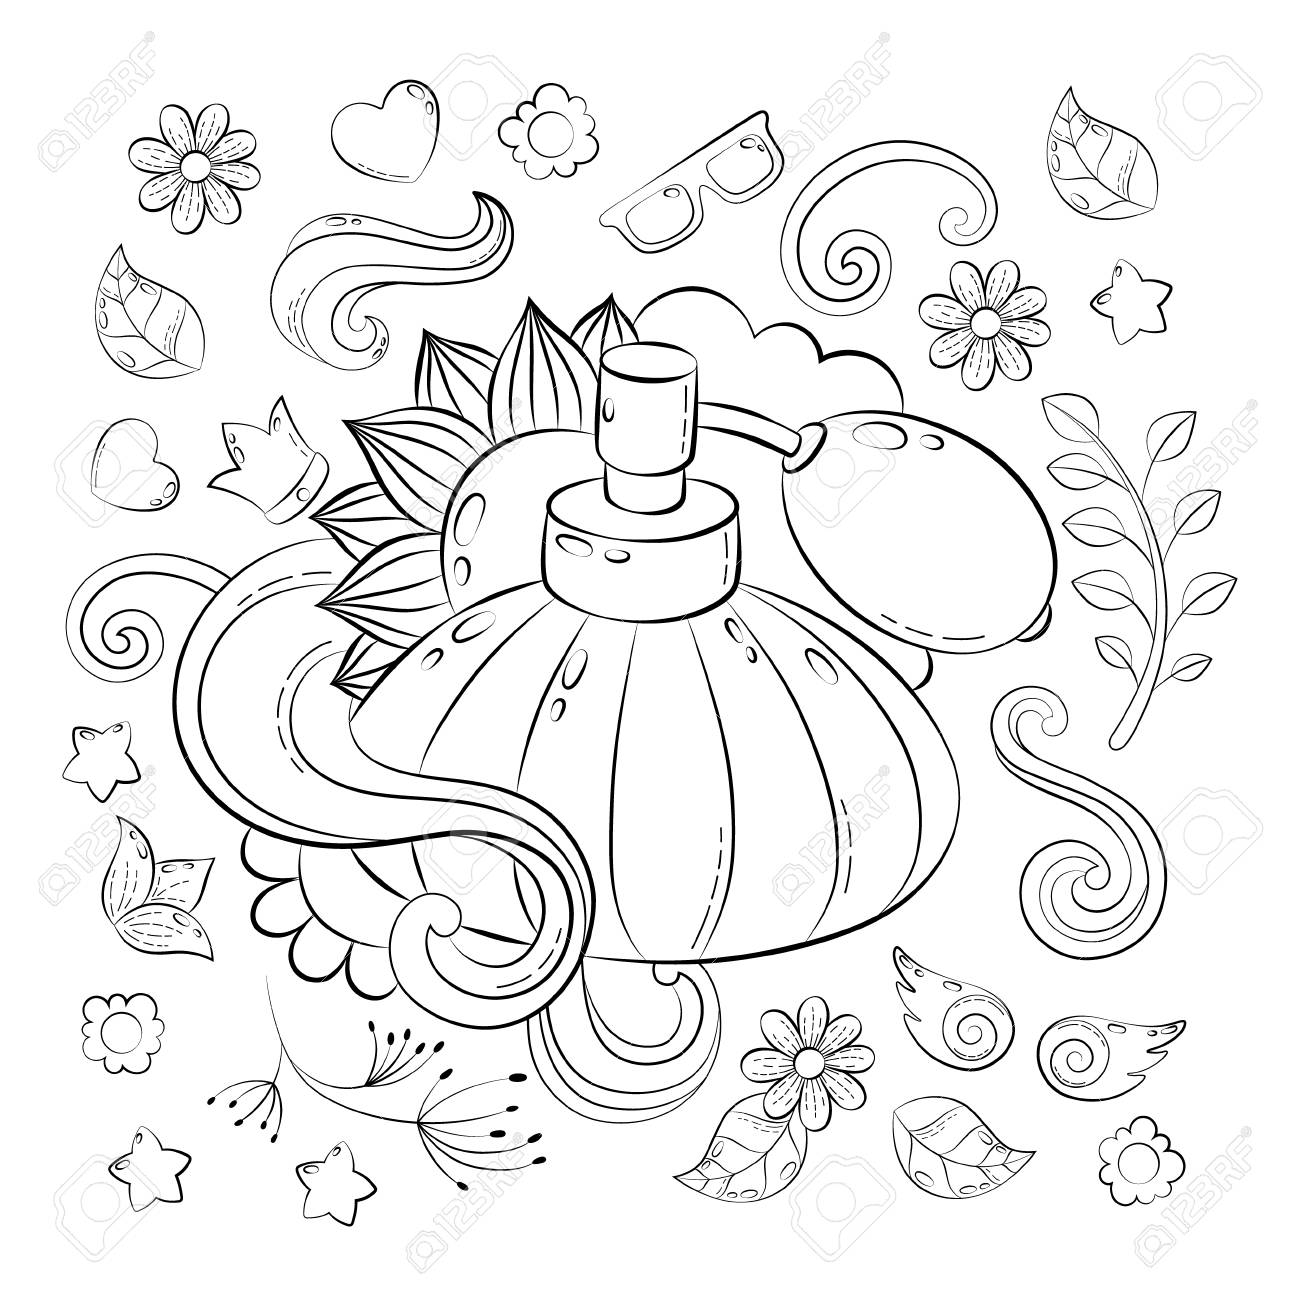 Make up concept hand drawn cartoon doodle illustration beauty pattern illustration for adult coloring book sketch for adult anti stress coloring book page with doodle elements royalty free svg cliparts vectors and